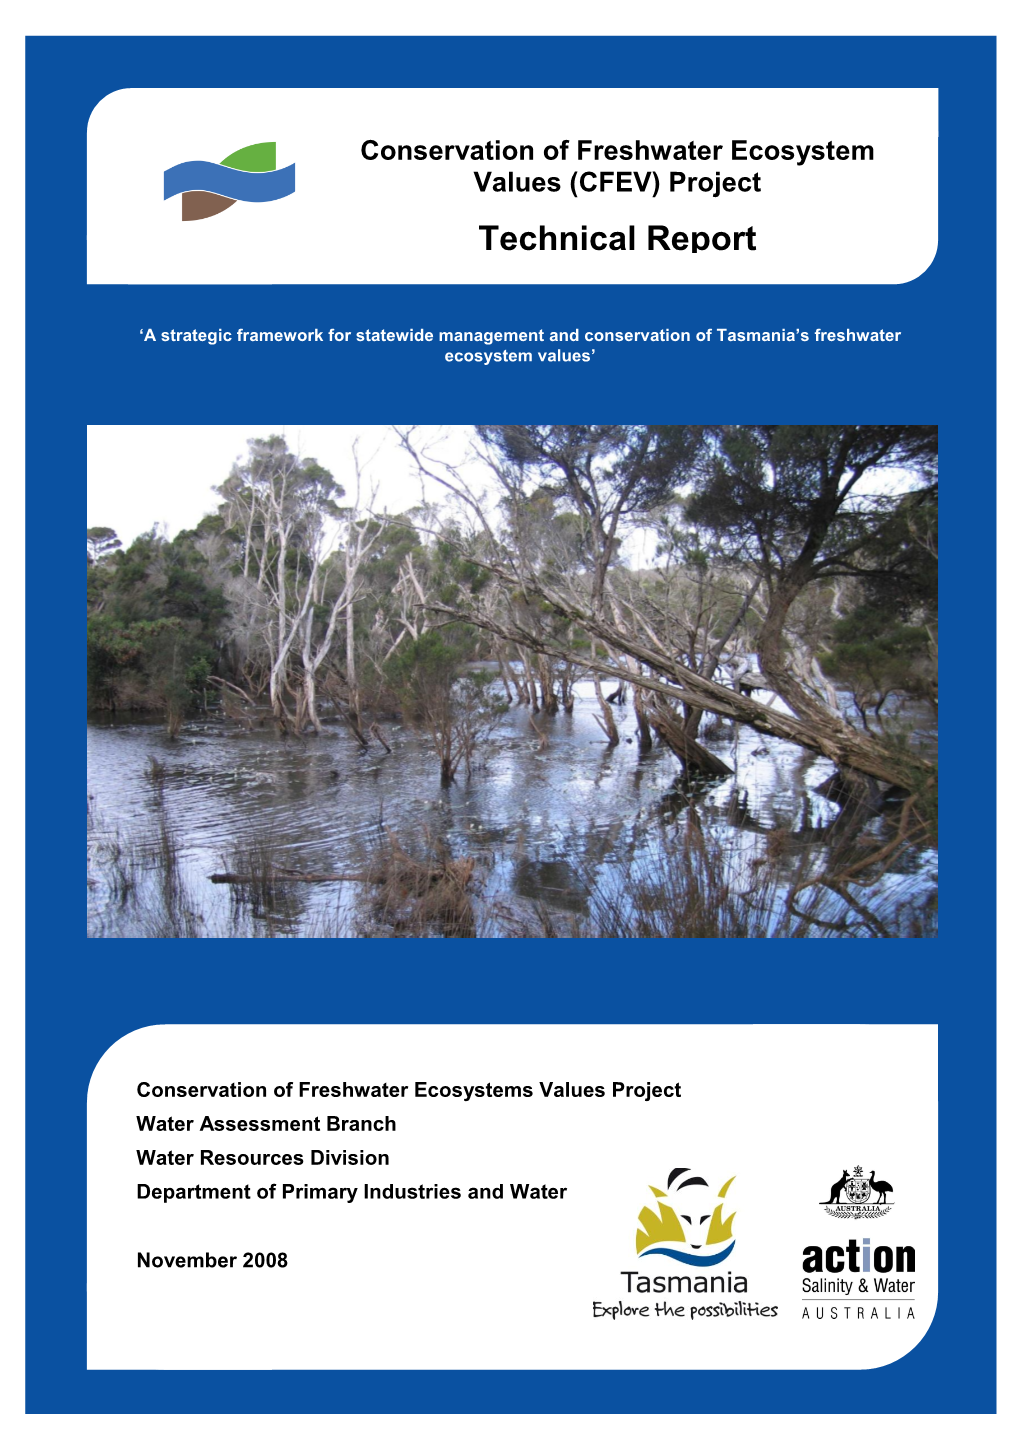 Conservation of Freshwater Ecosystem Values (CFEV) Project Technical Report